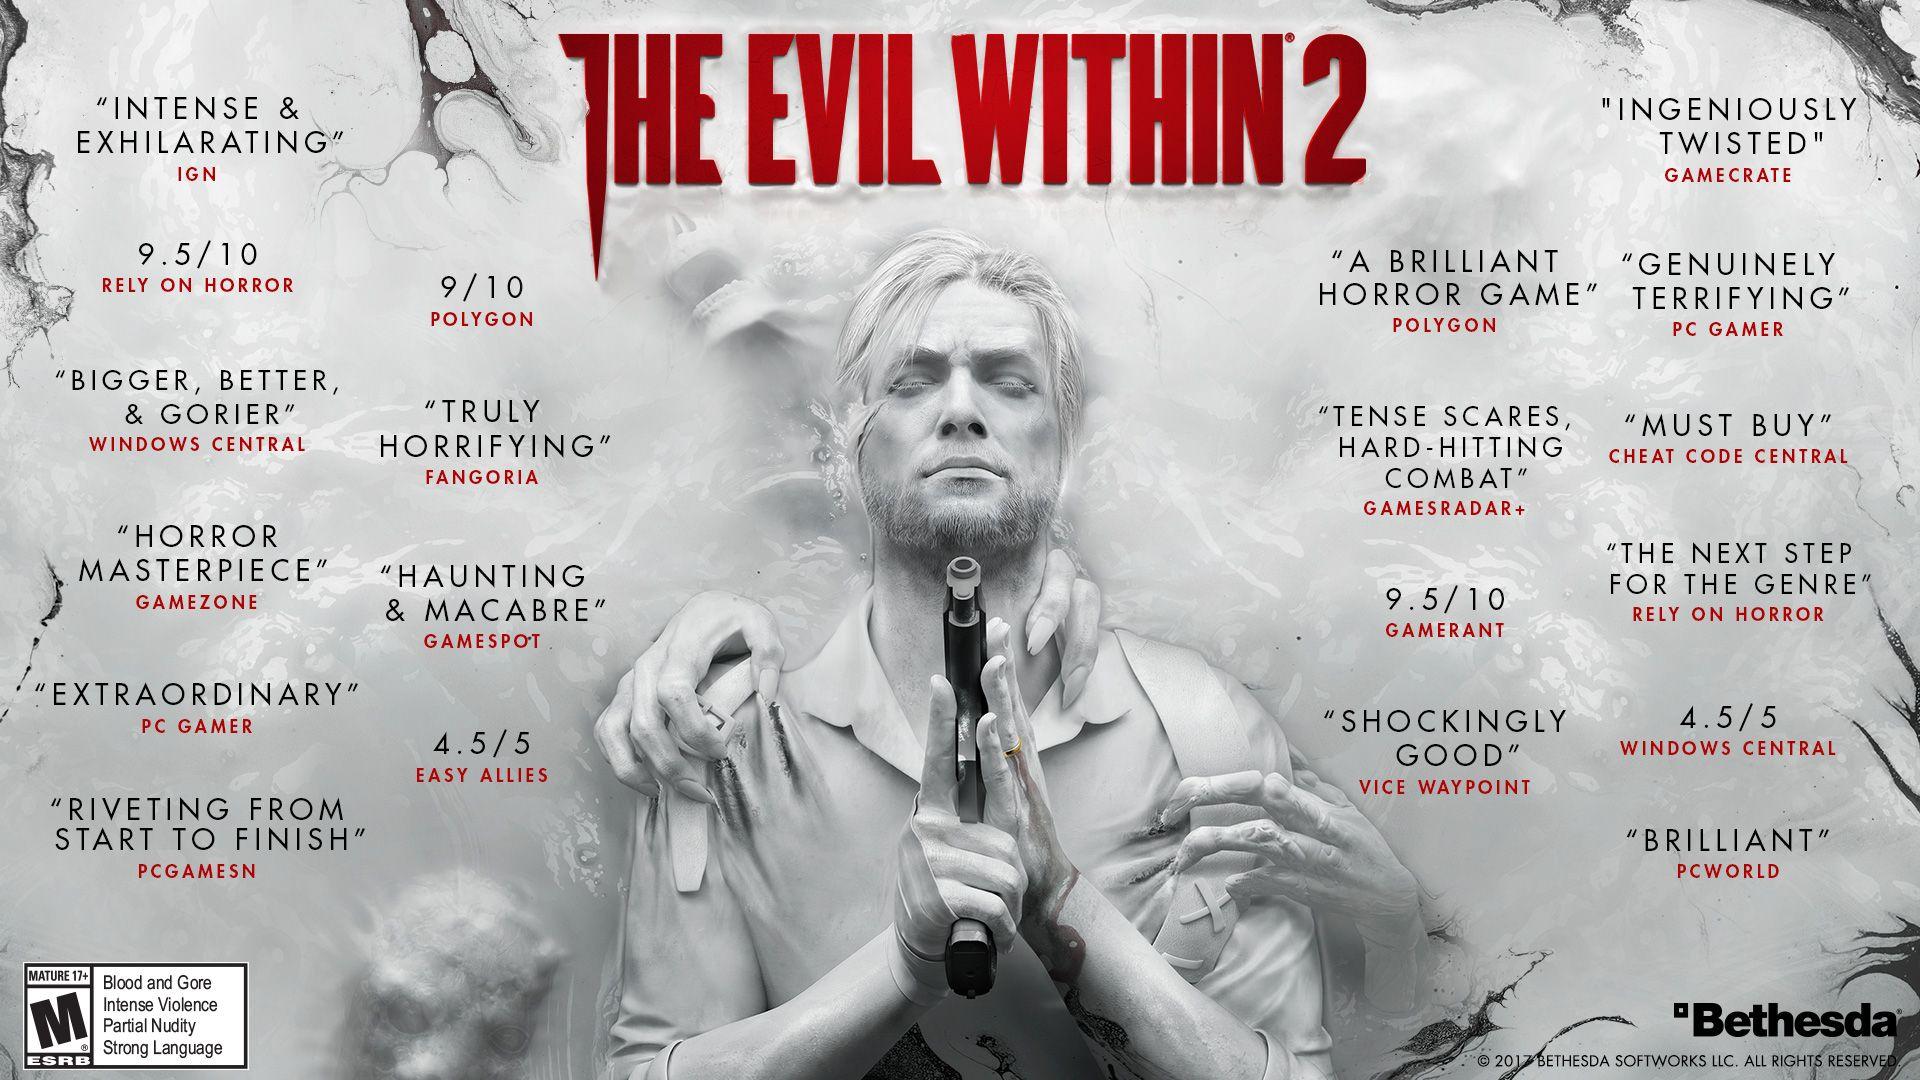 The Evil Within 2 Review Roundup